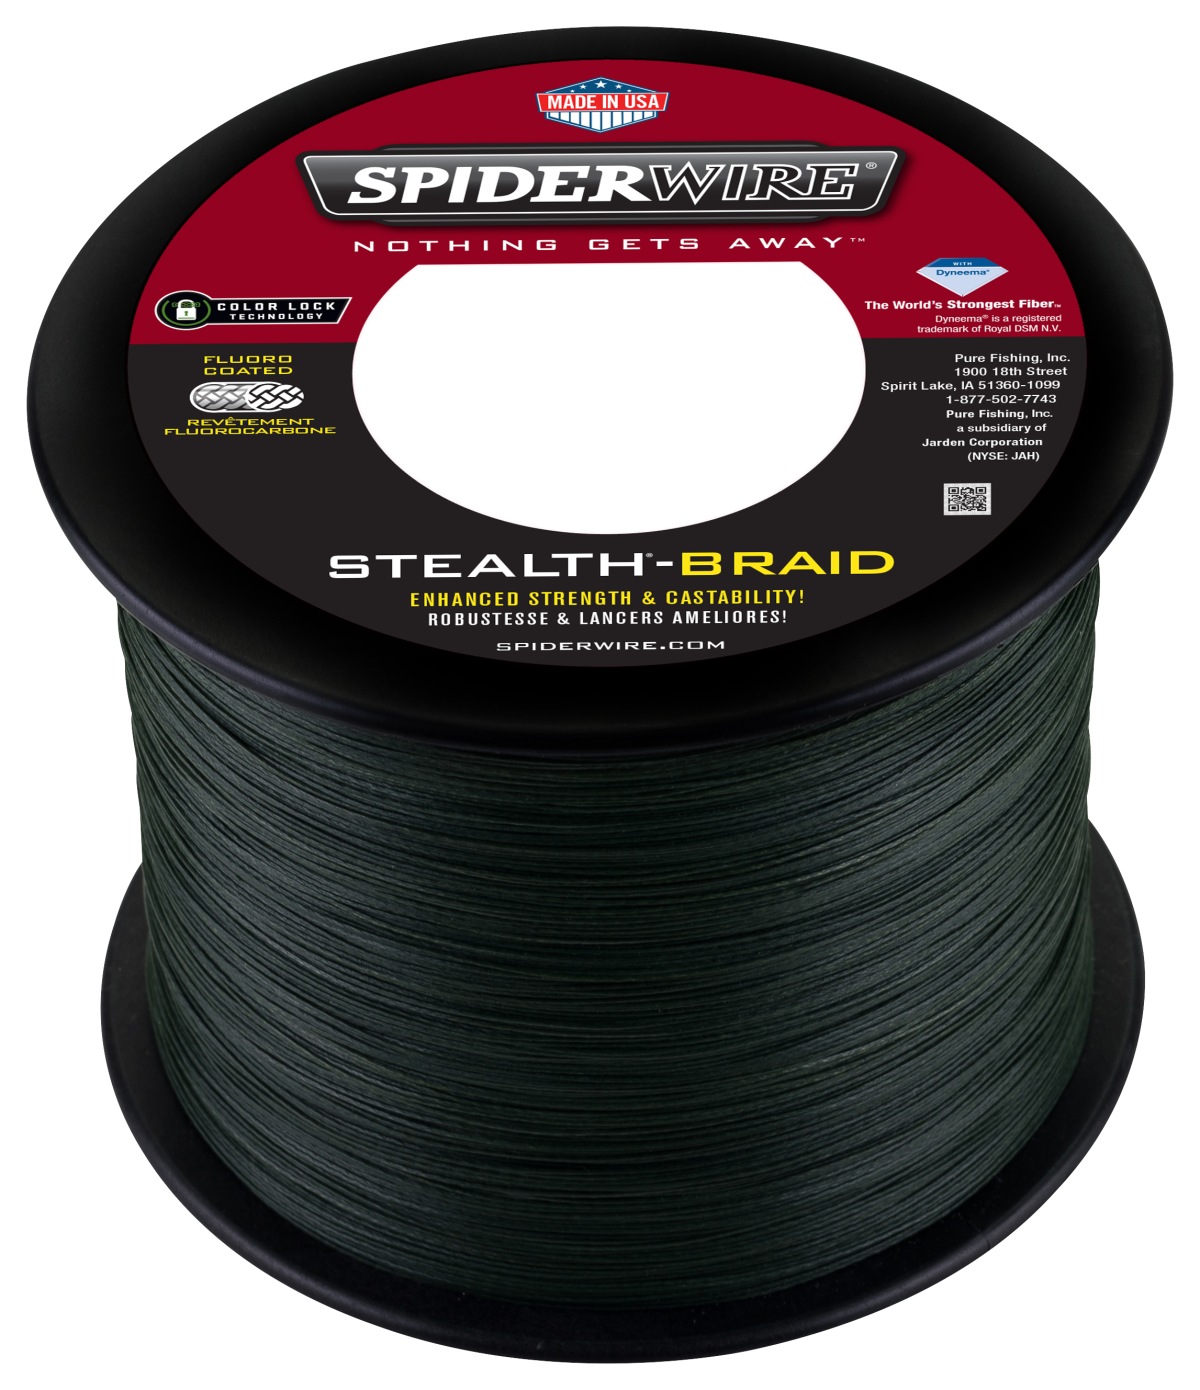 Spiderwire Stealth Braid Fishing Line - 1200 Yards - 65 lb. test - Moss Green